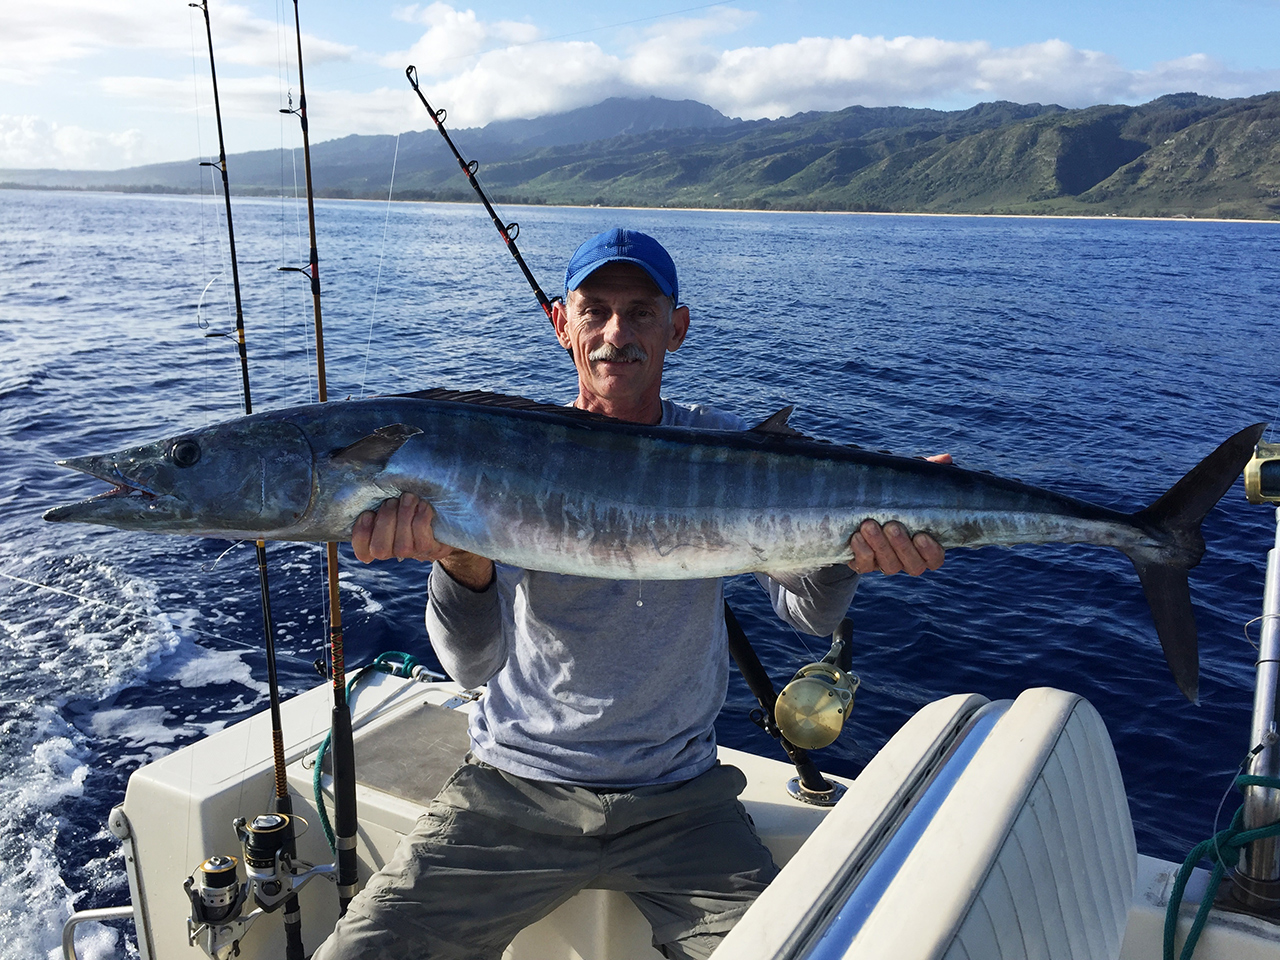 Gerry with a large wahoo fish on a boat off Hawaii